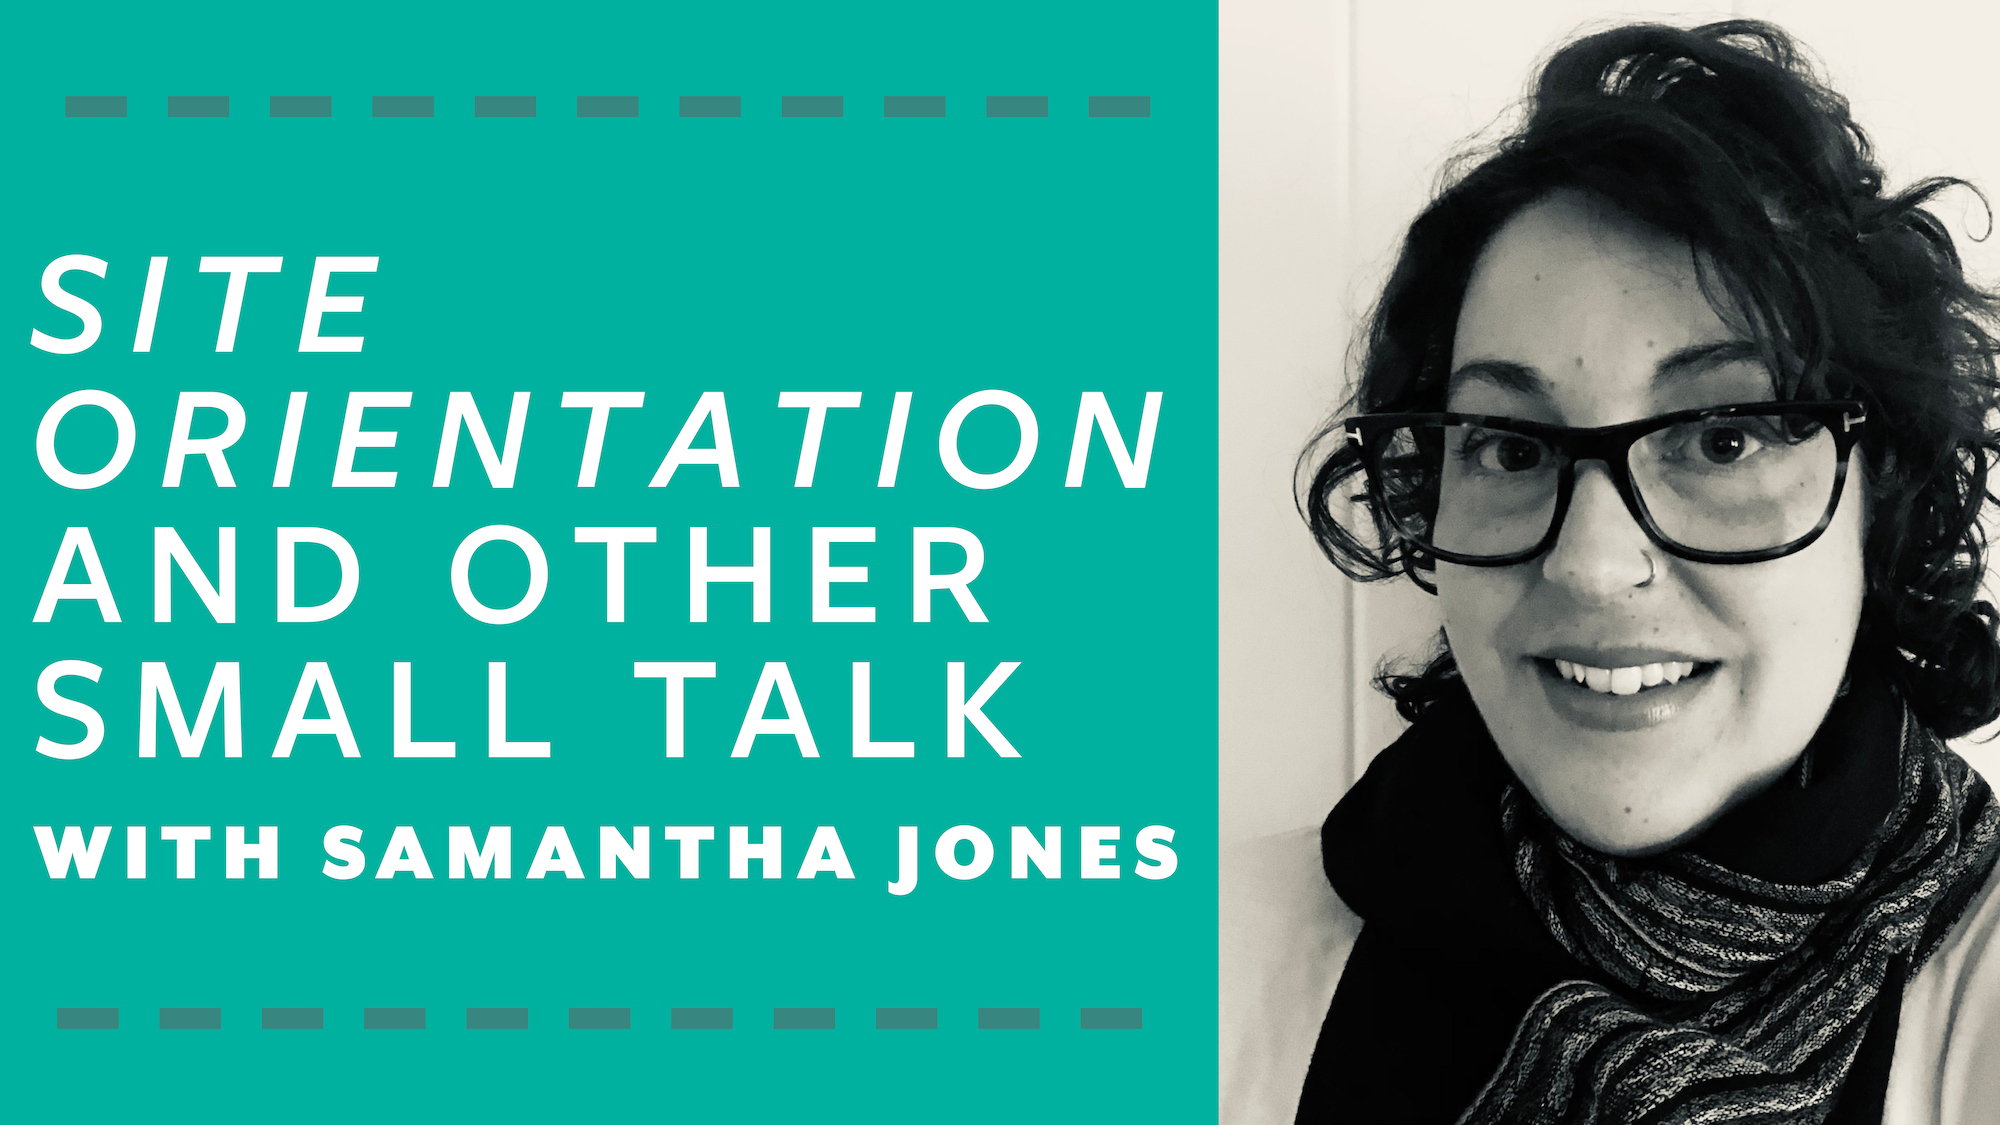 Site Orientation and Other Small Talk with Samantha Jones